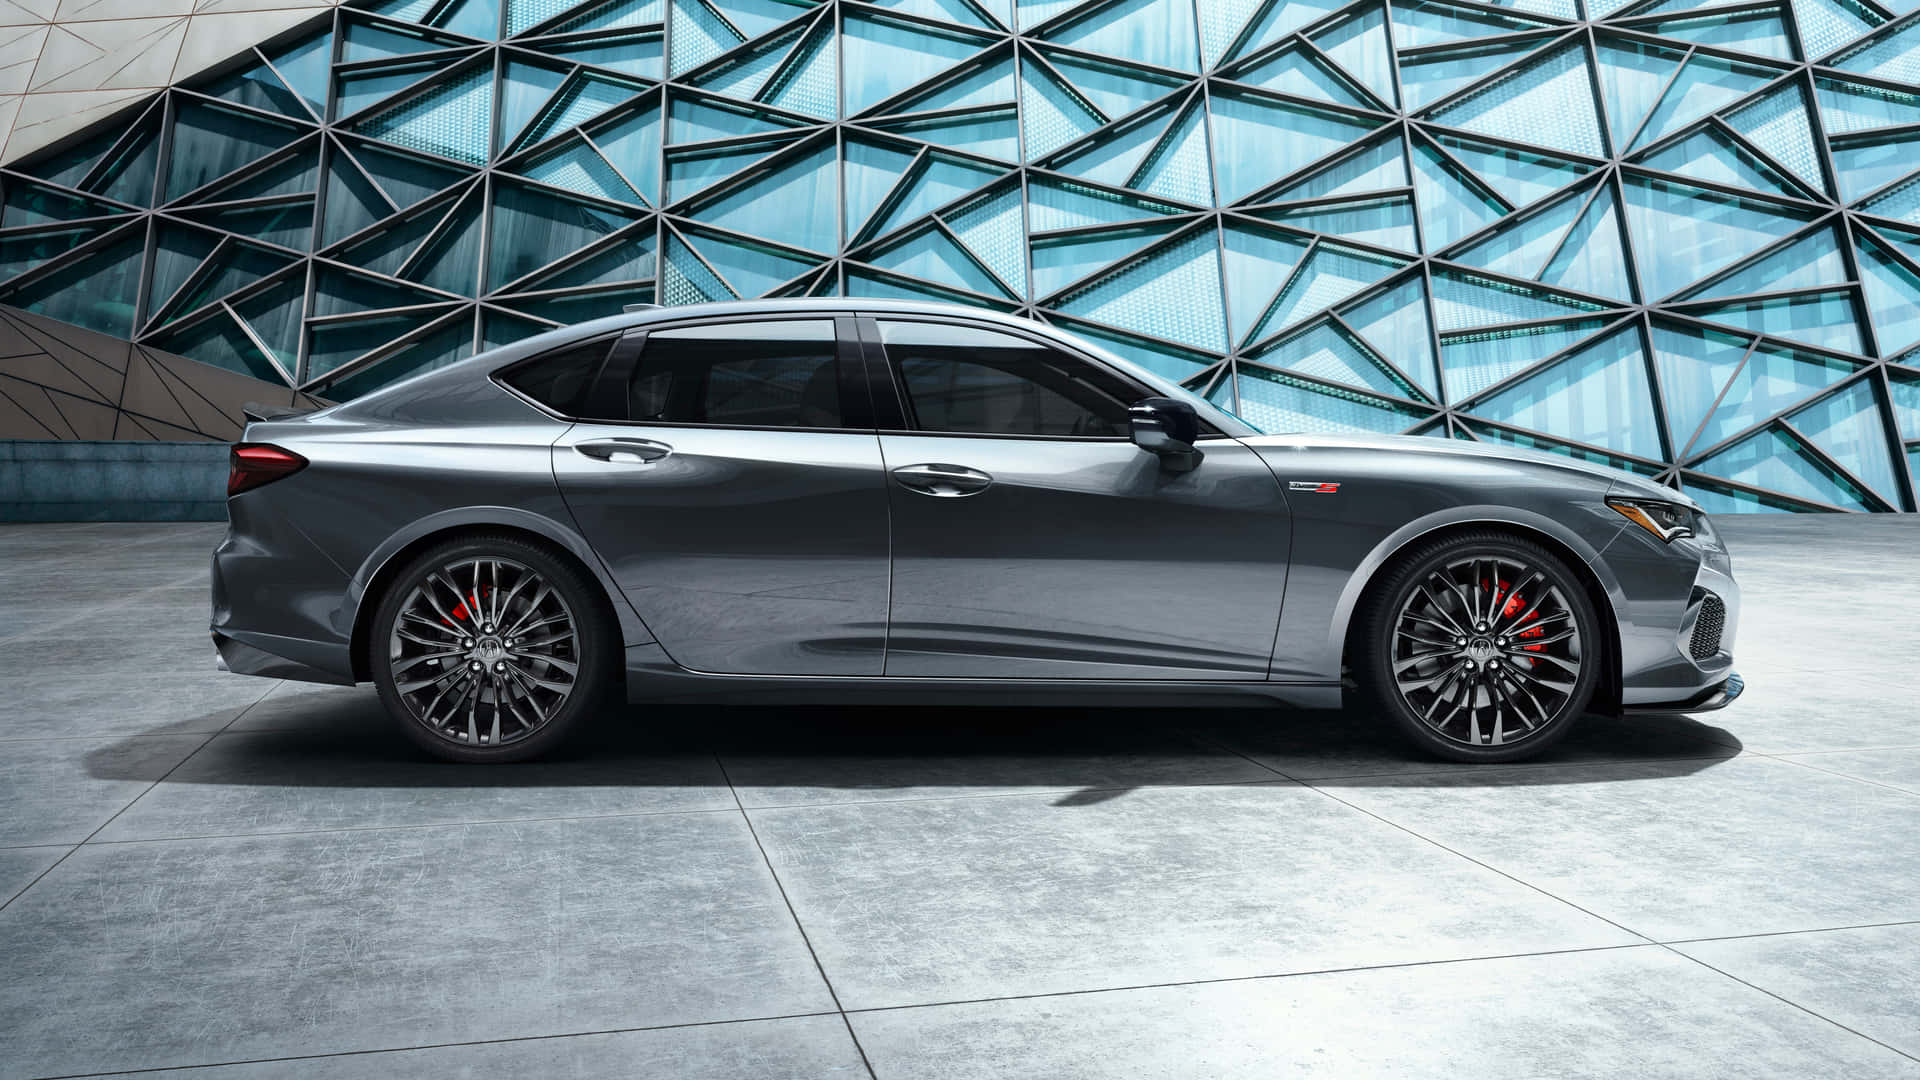 Acura TLX - Luxury and Performance at Its Best Wallpaper